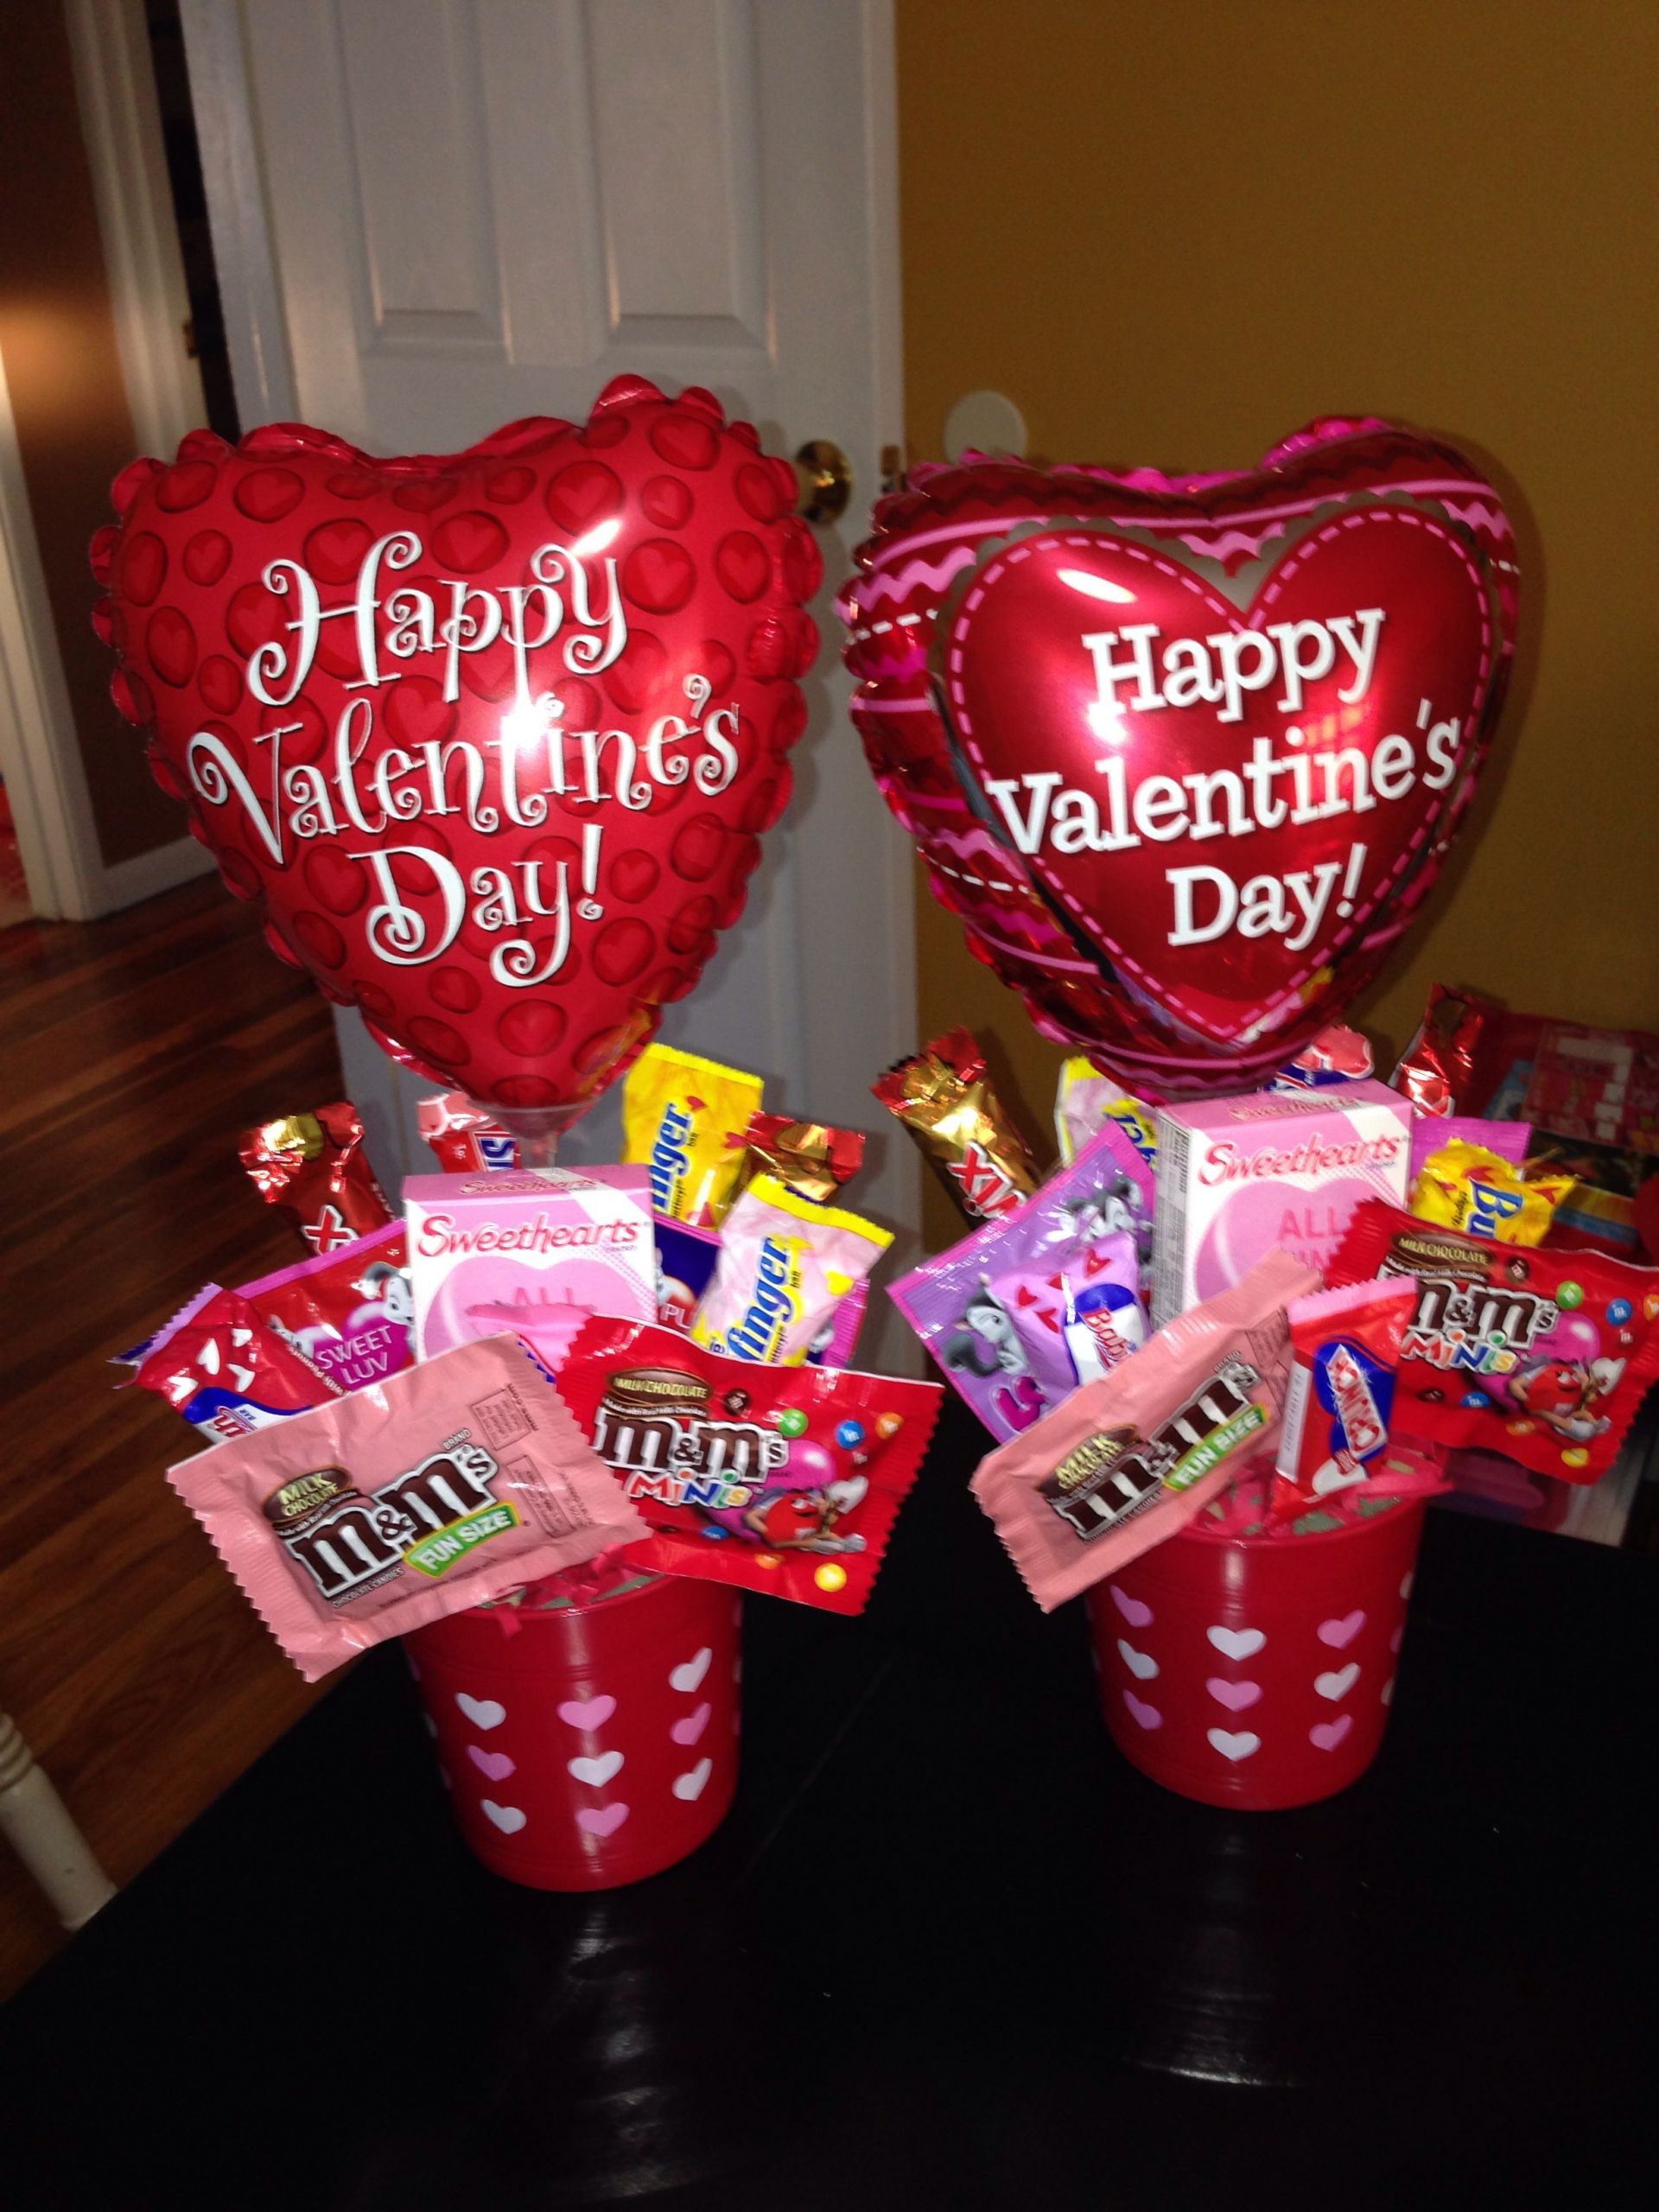 Valentines Day Candy Gift Ideas
 Pin on Candy bouquets